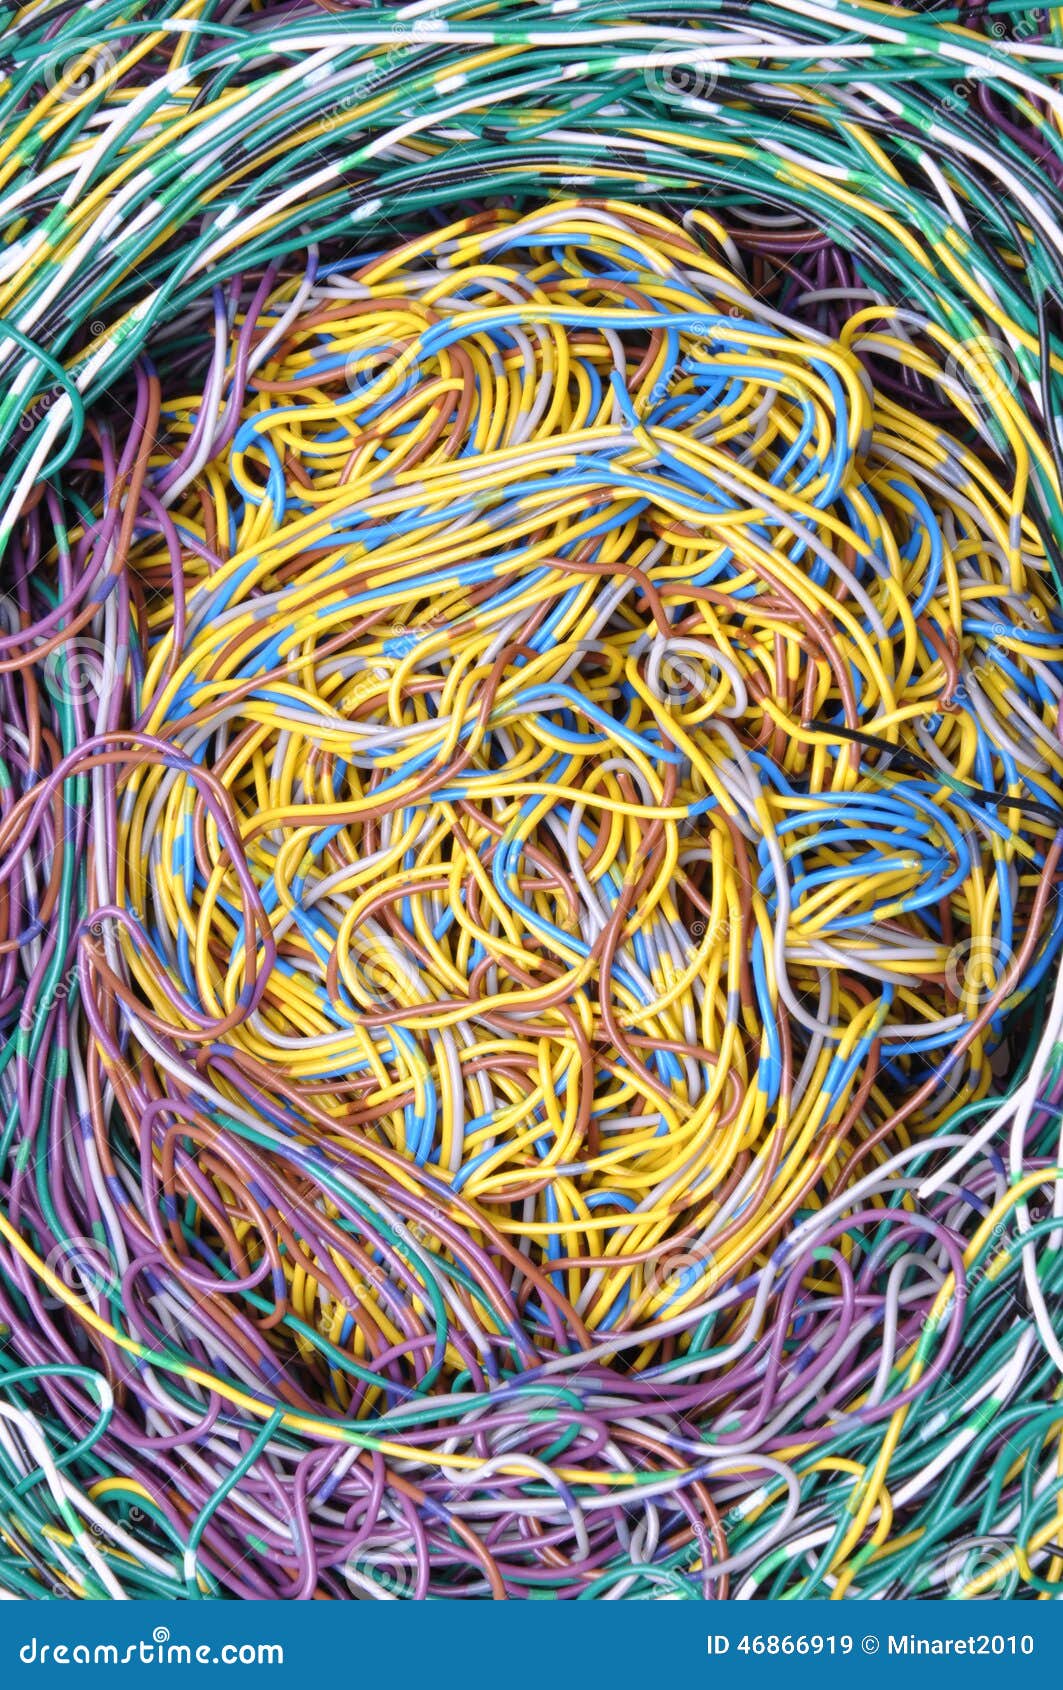 Bundles of Colorful Network Cables Stock Image - Image of copper ...